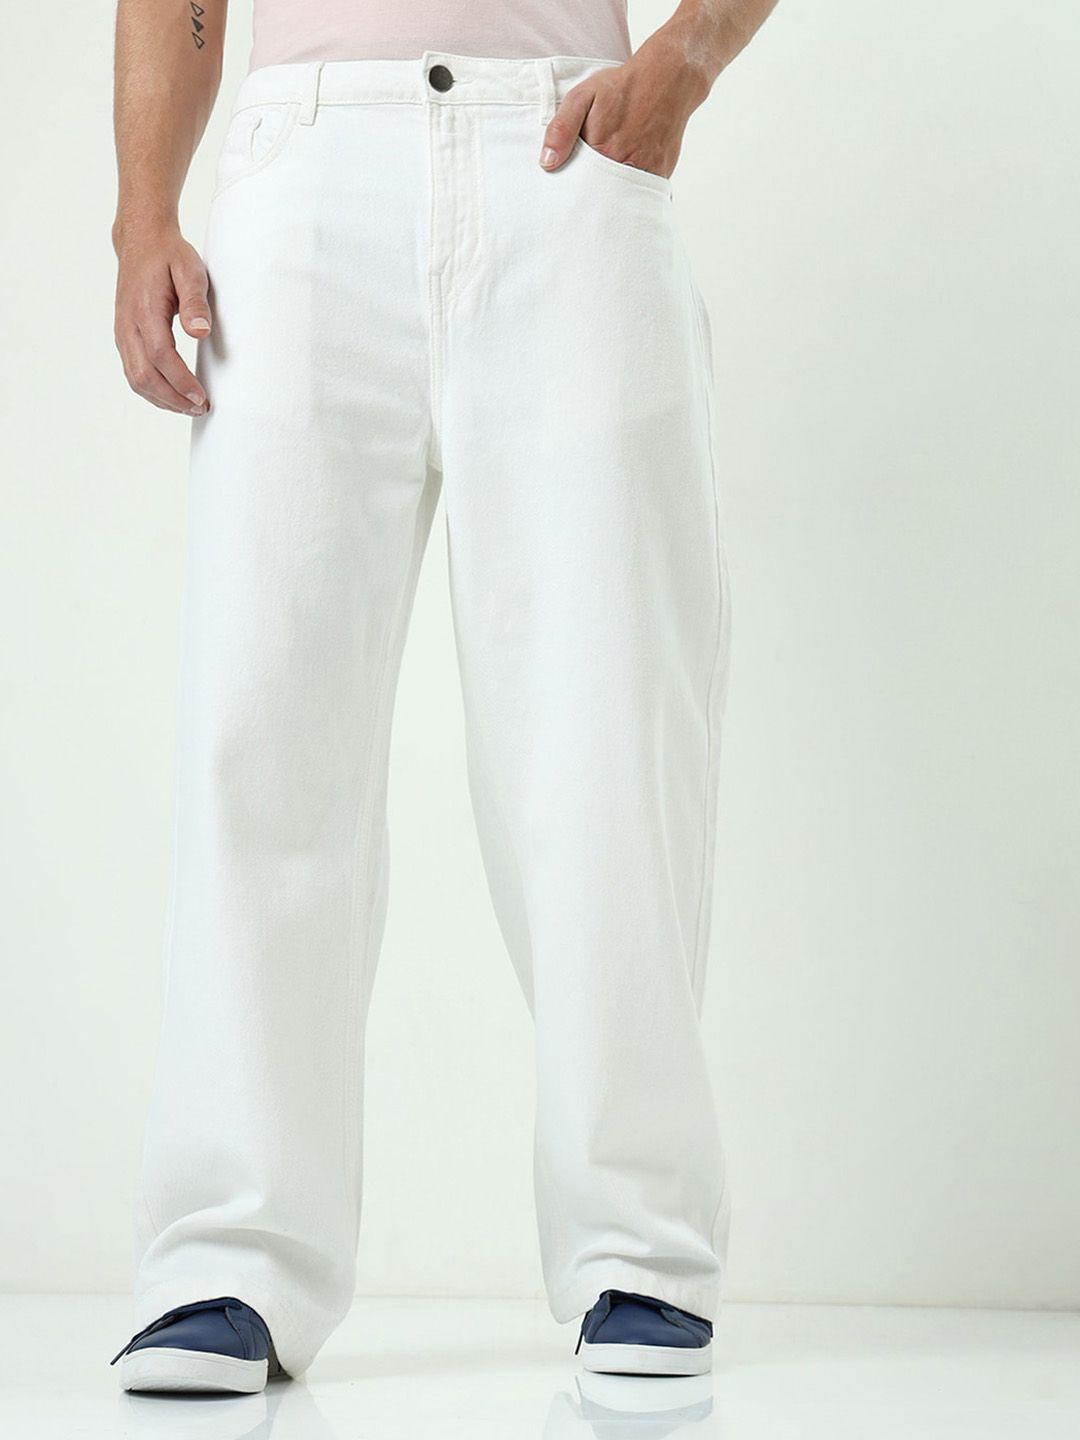 bewakoof men white baggy straight fit clean look cotton jeans